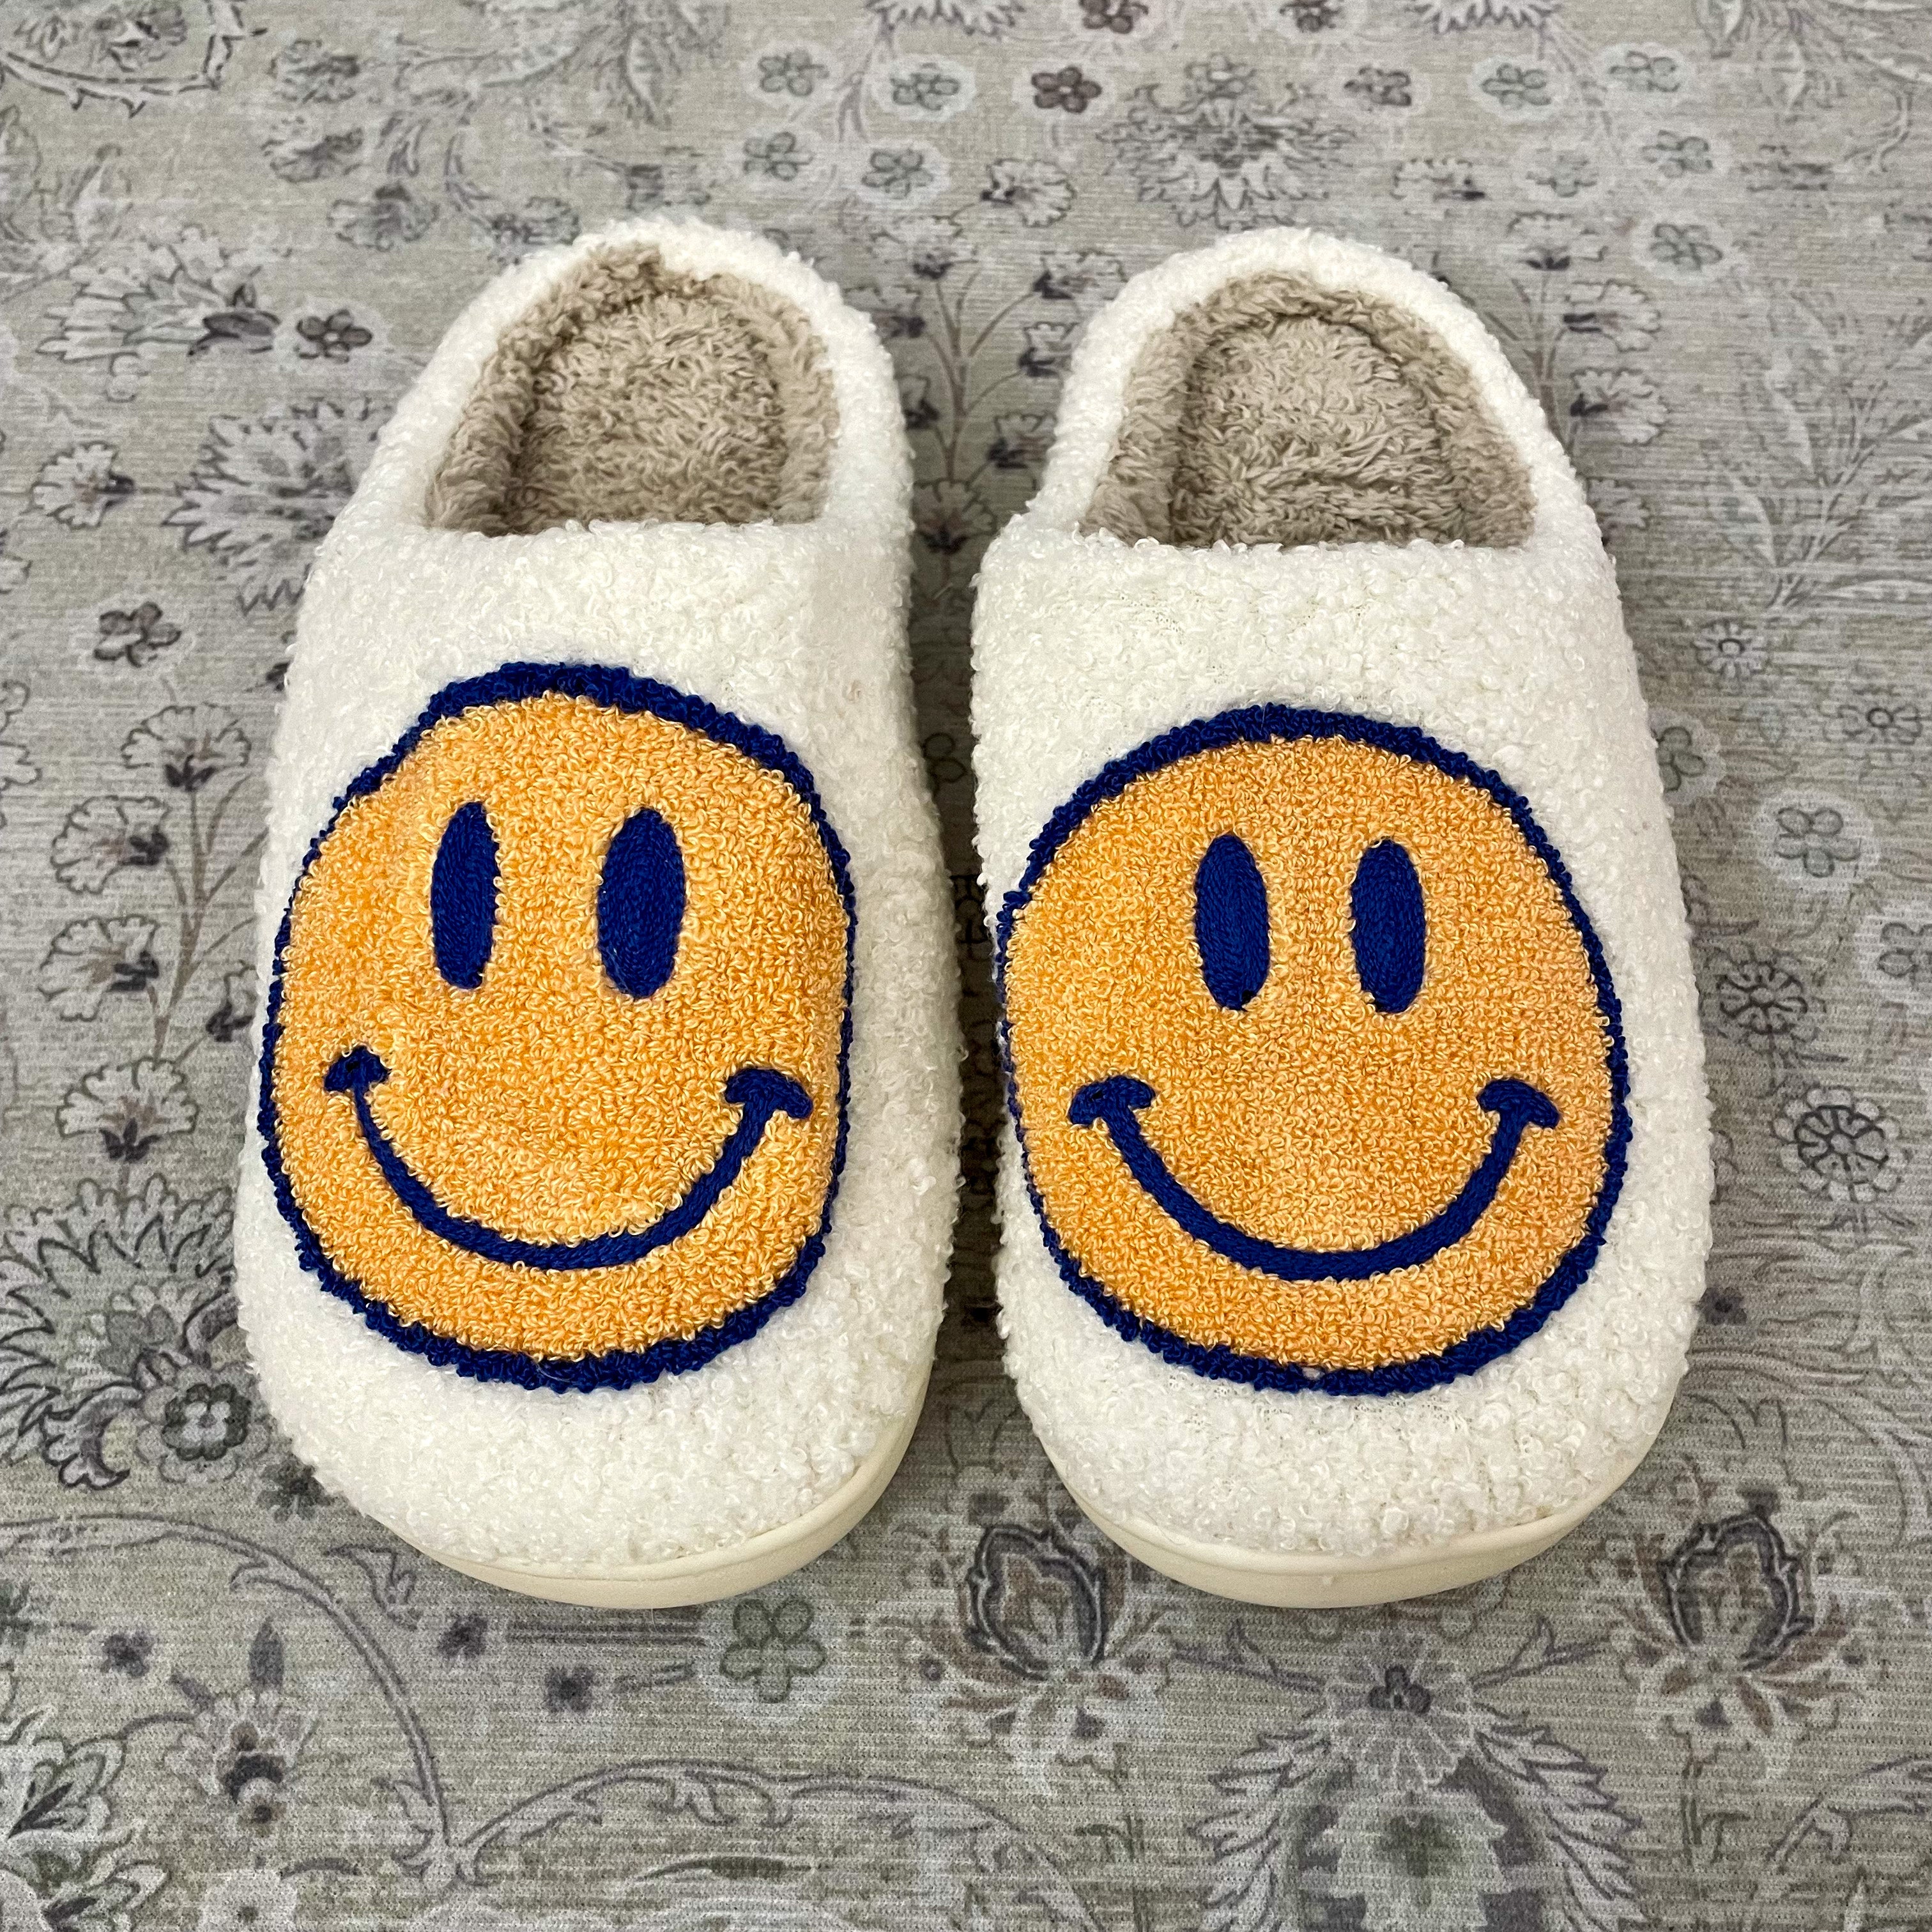 smiley face and shoe emoji